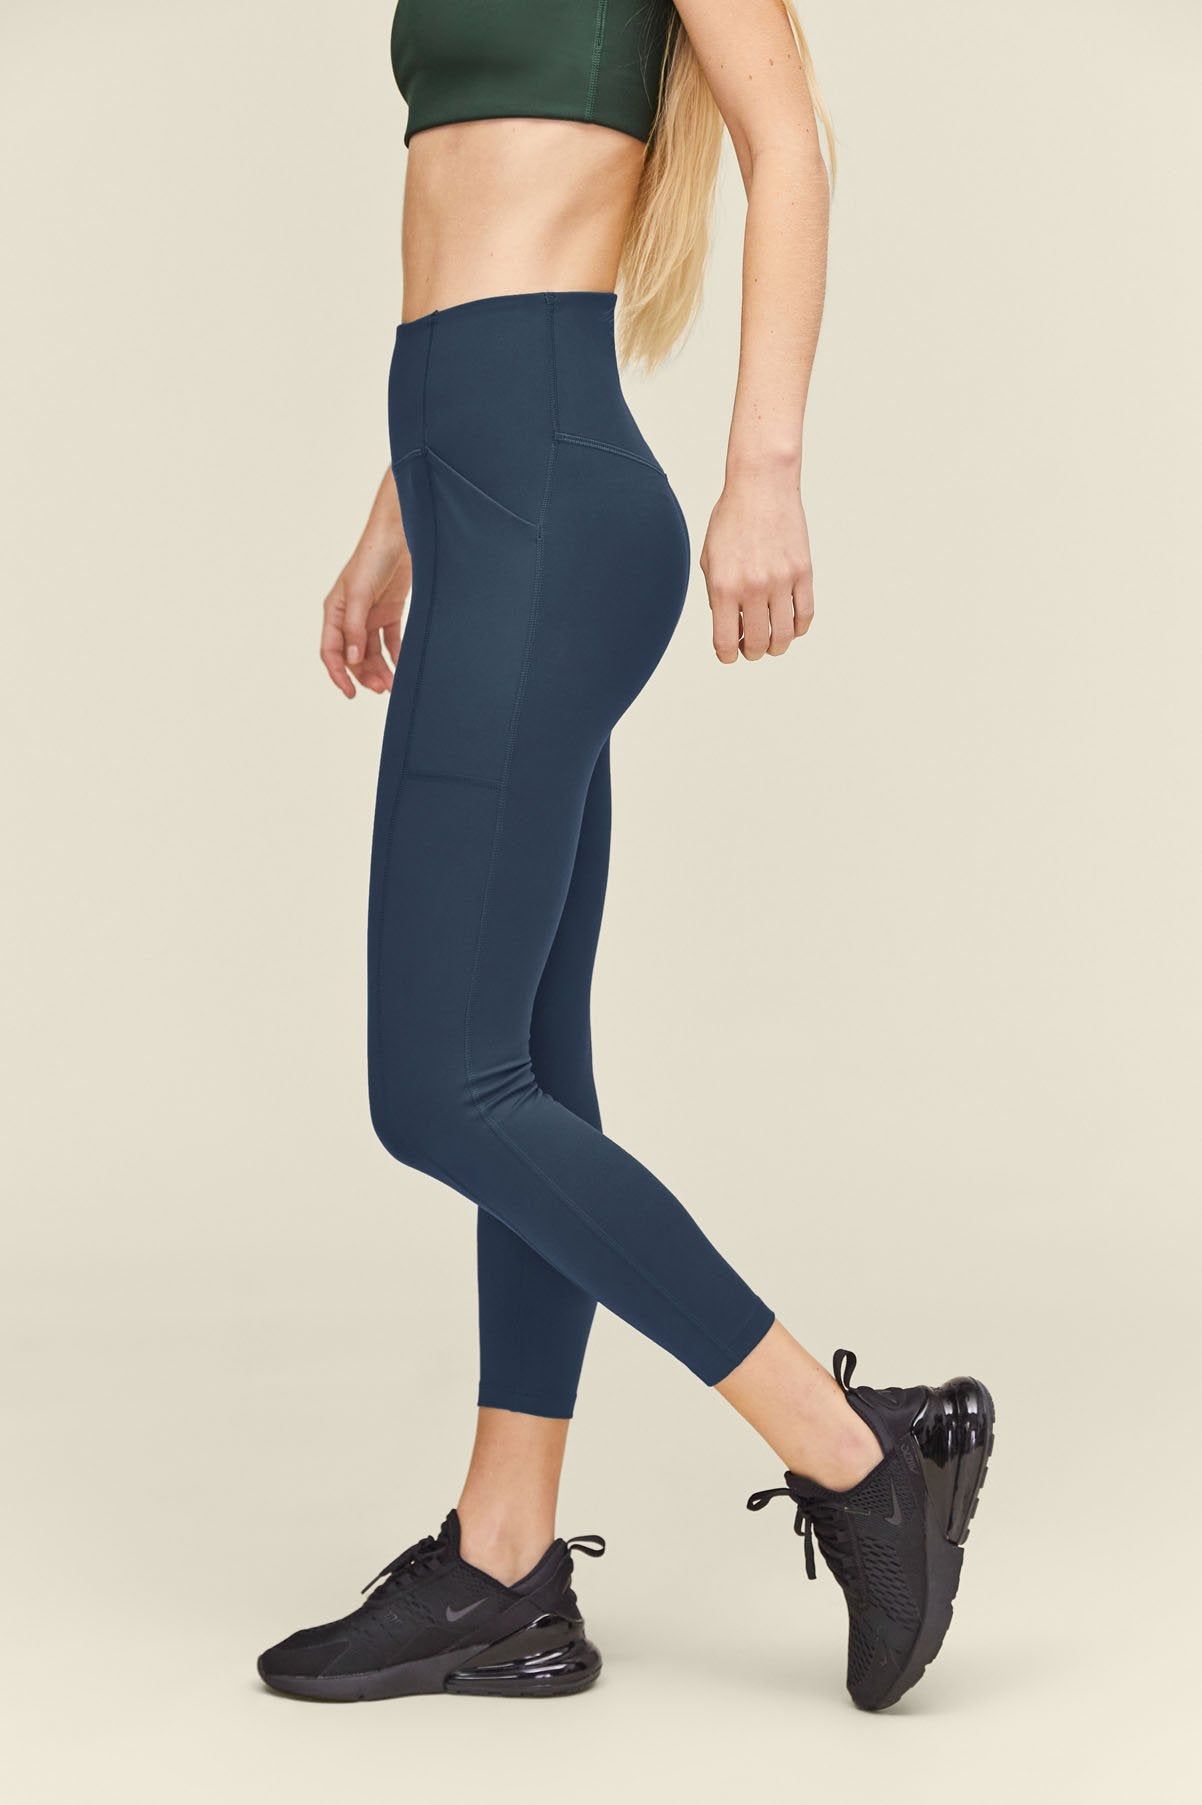 20 Best Leggings and Yoga Pants With Pockets 2022